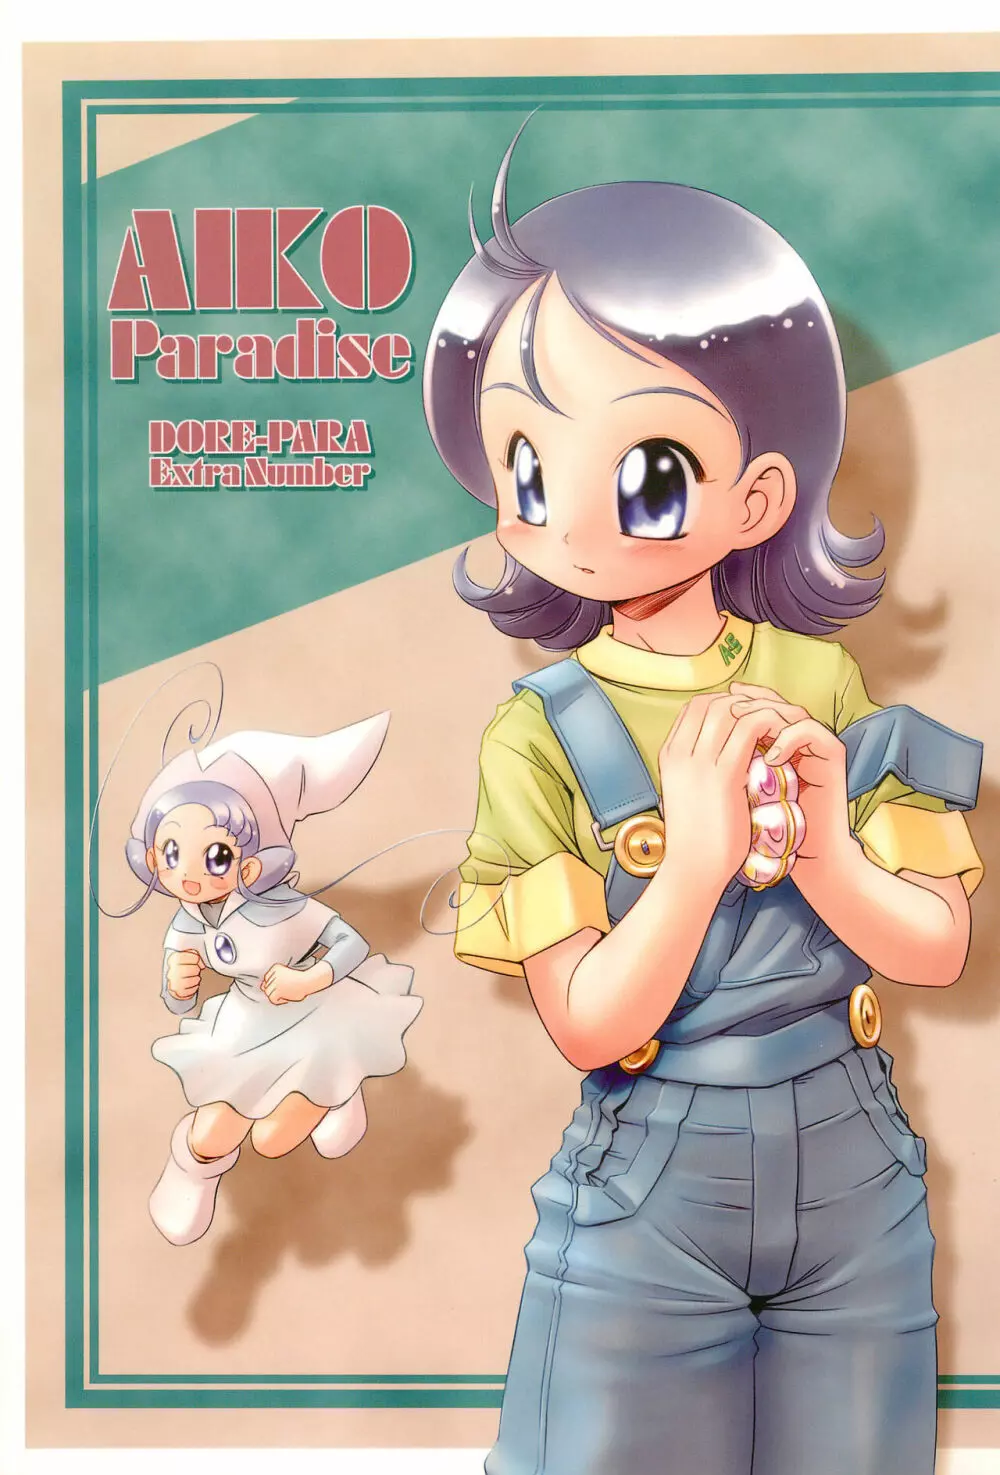 AIKO Paradise Page.1